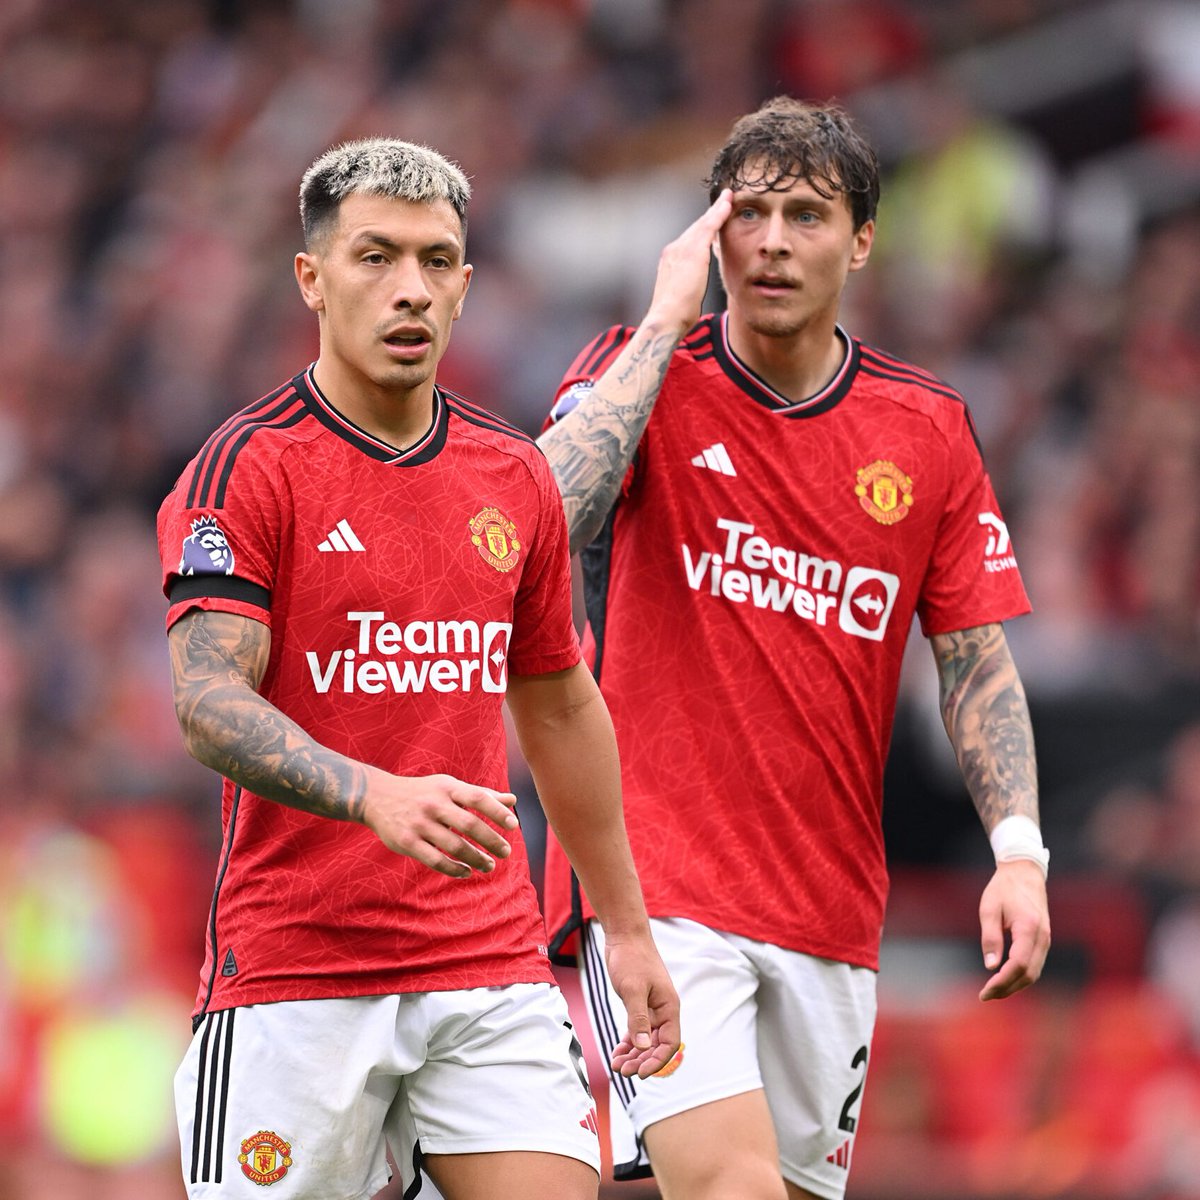 🚨 Four Manchester United stars were involved in huge bust-ups after Saturday's 3-1 defeat to Brighton. Bruno Fernandes confronted Scott McTominay and Lisandro Martinez and Victor Lindelöf also lost it with each other after the game. (Source: Sun Sport)